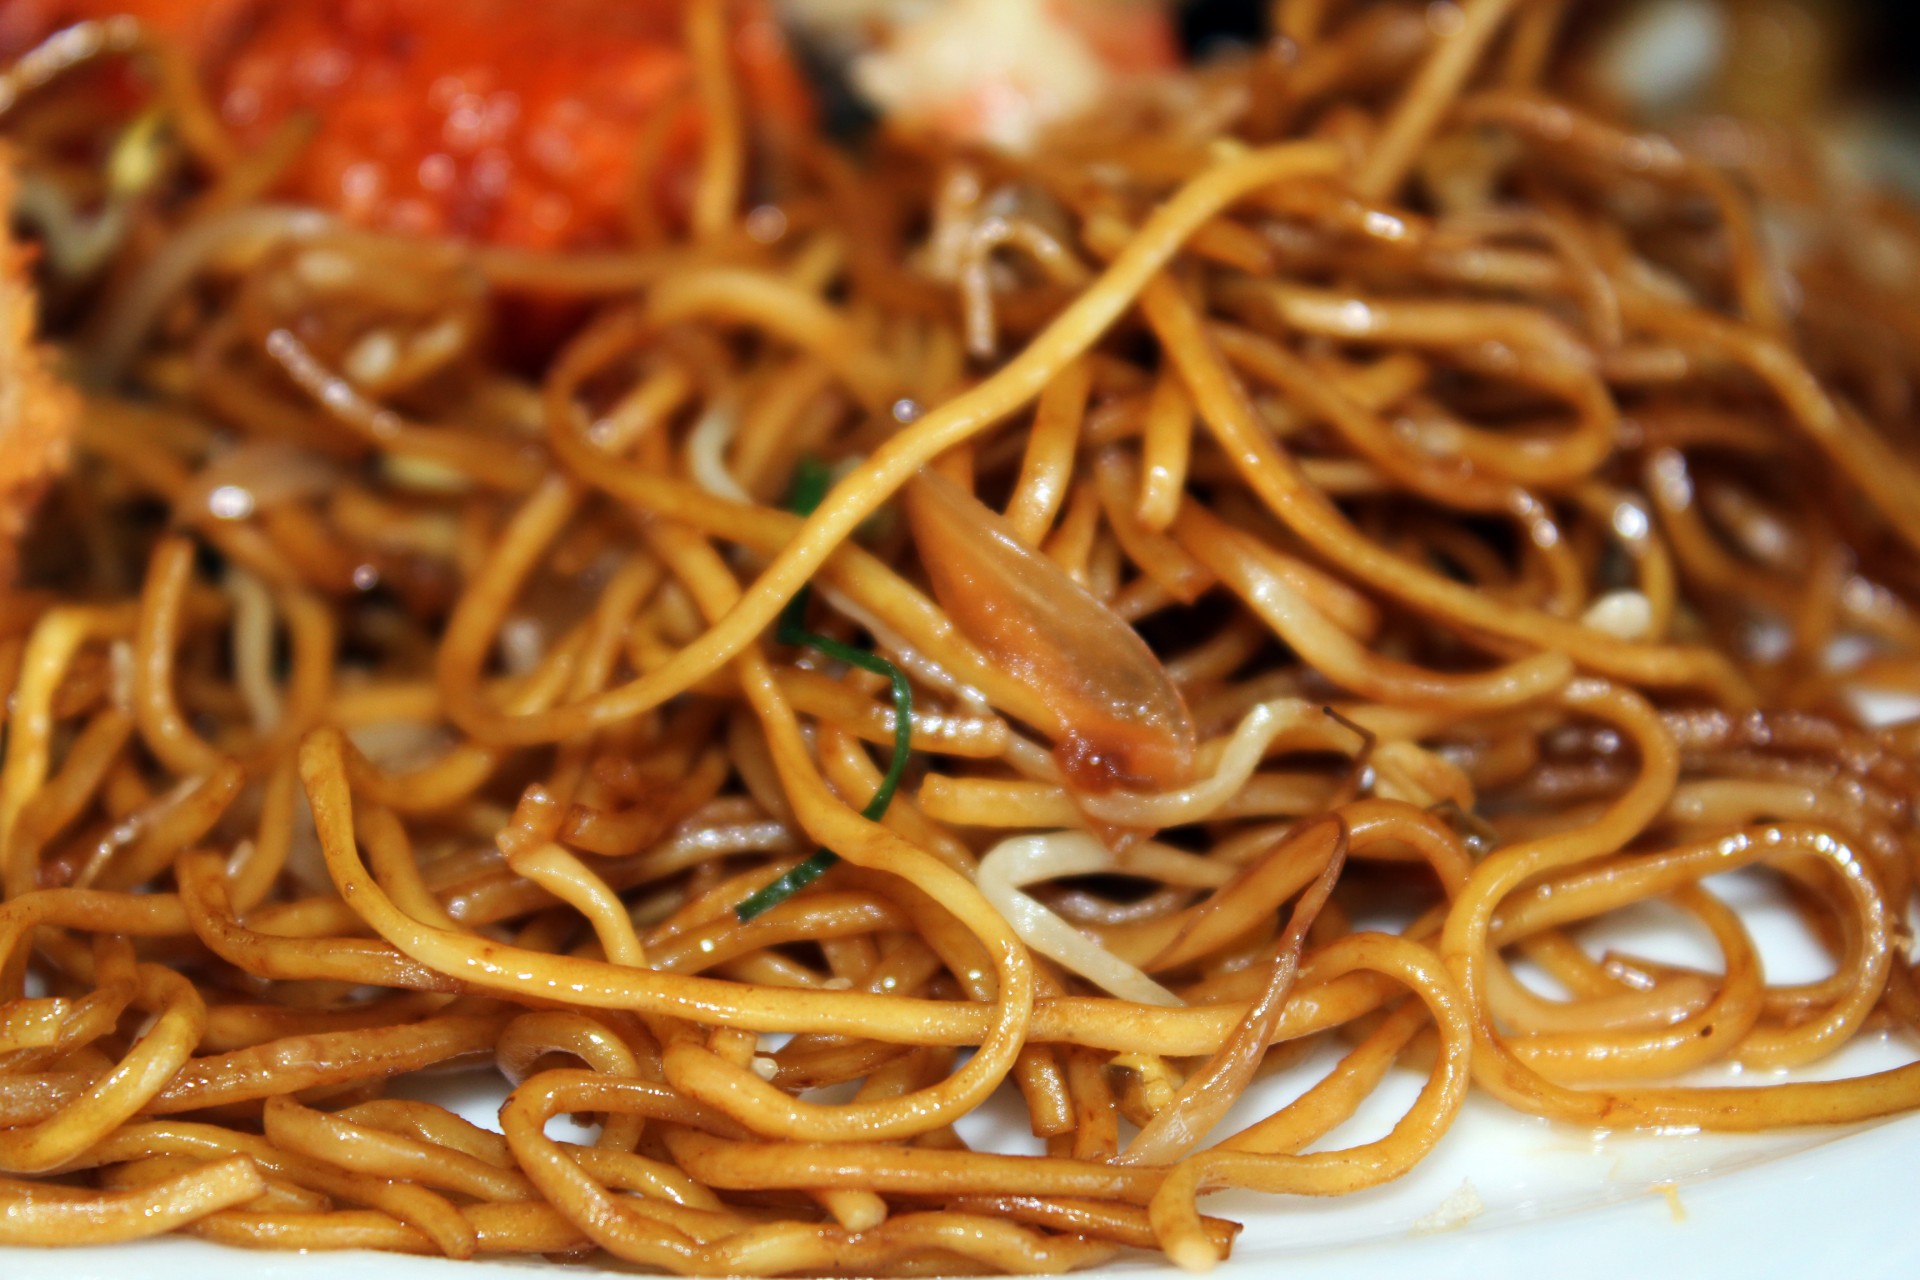 Philippine Pancit Guisado (Fried Noodles with mixed meats)